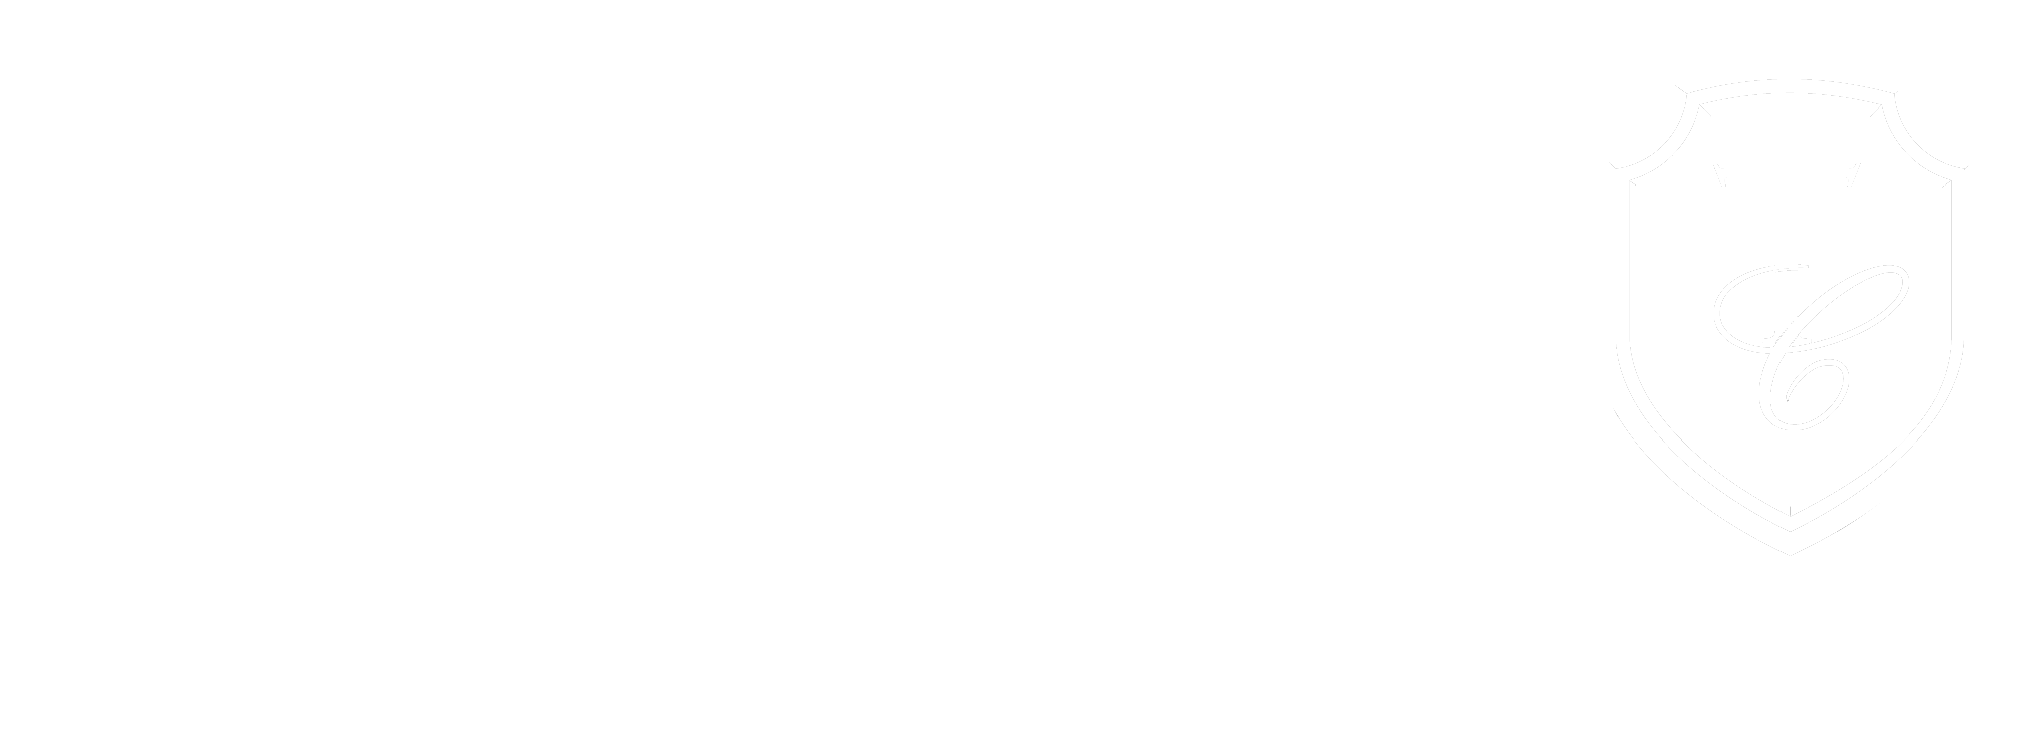 Trace Construction